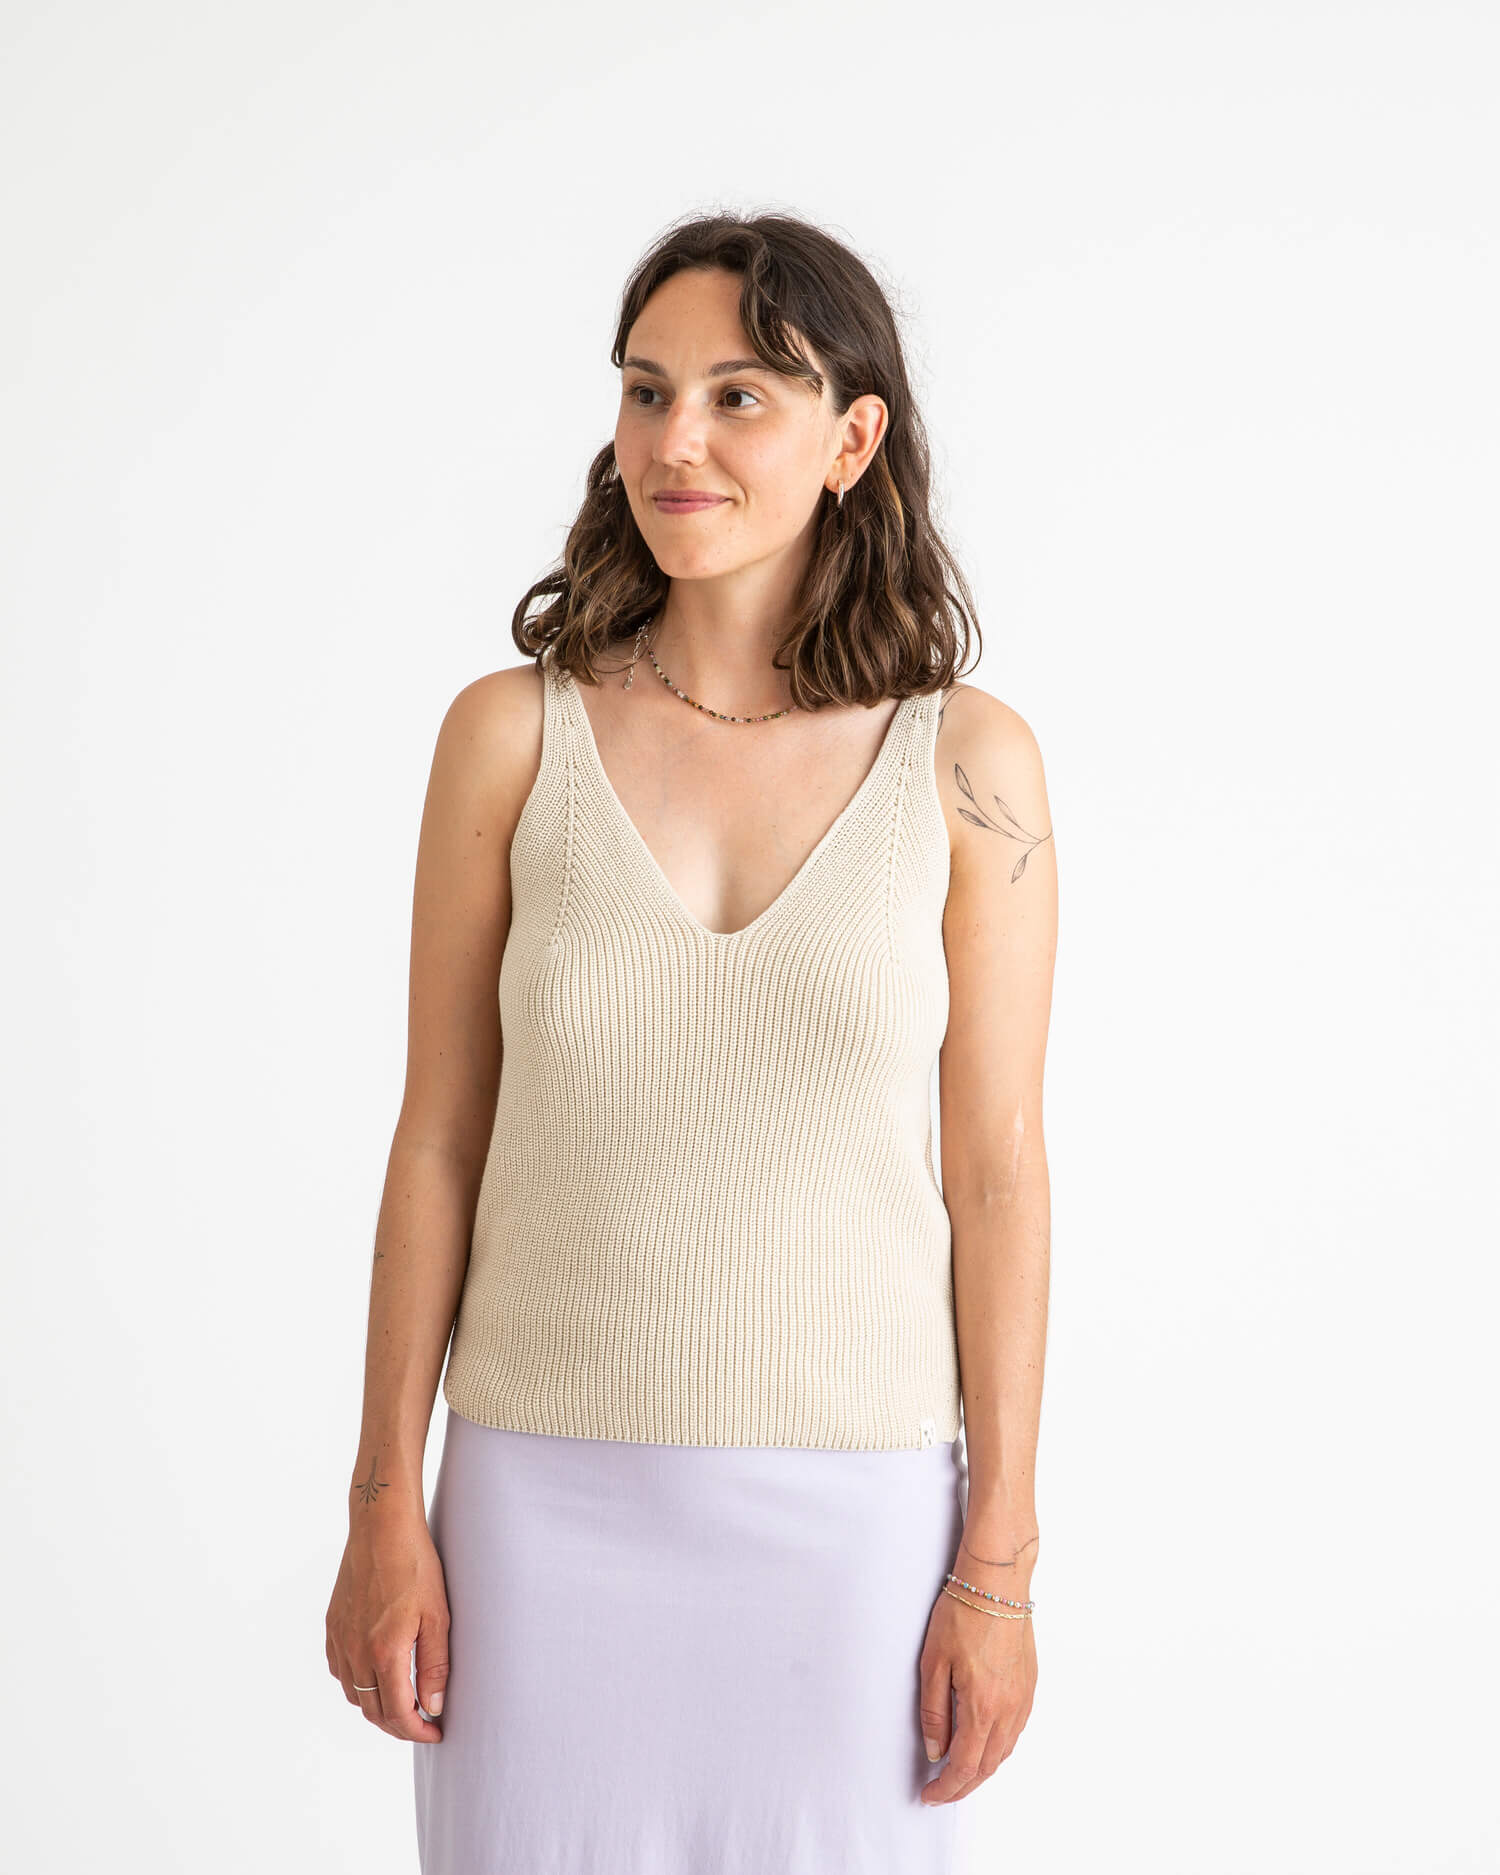 White, knitted tank top made from 100% organic cotton from Matona